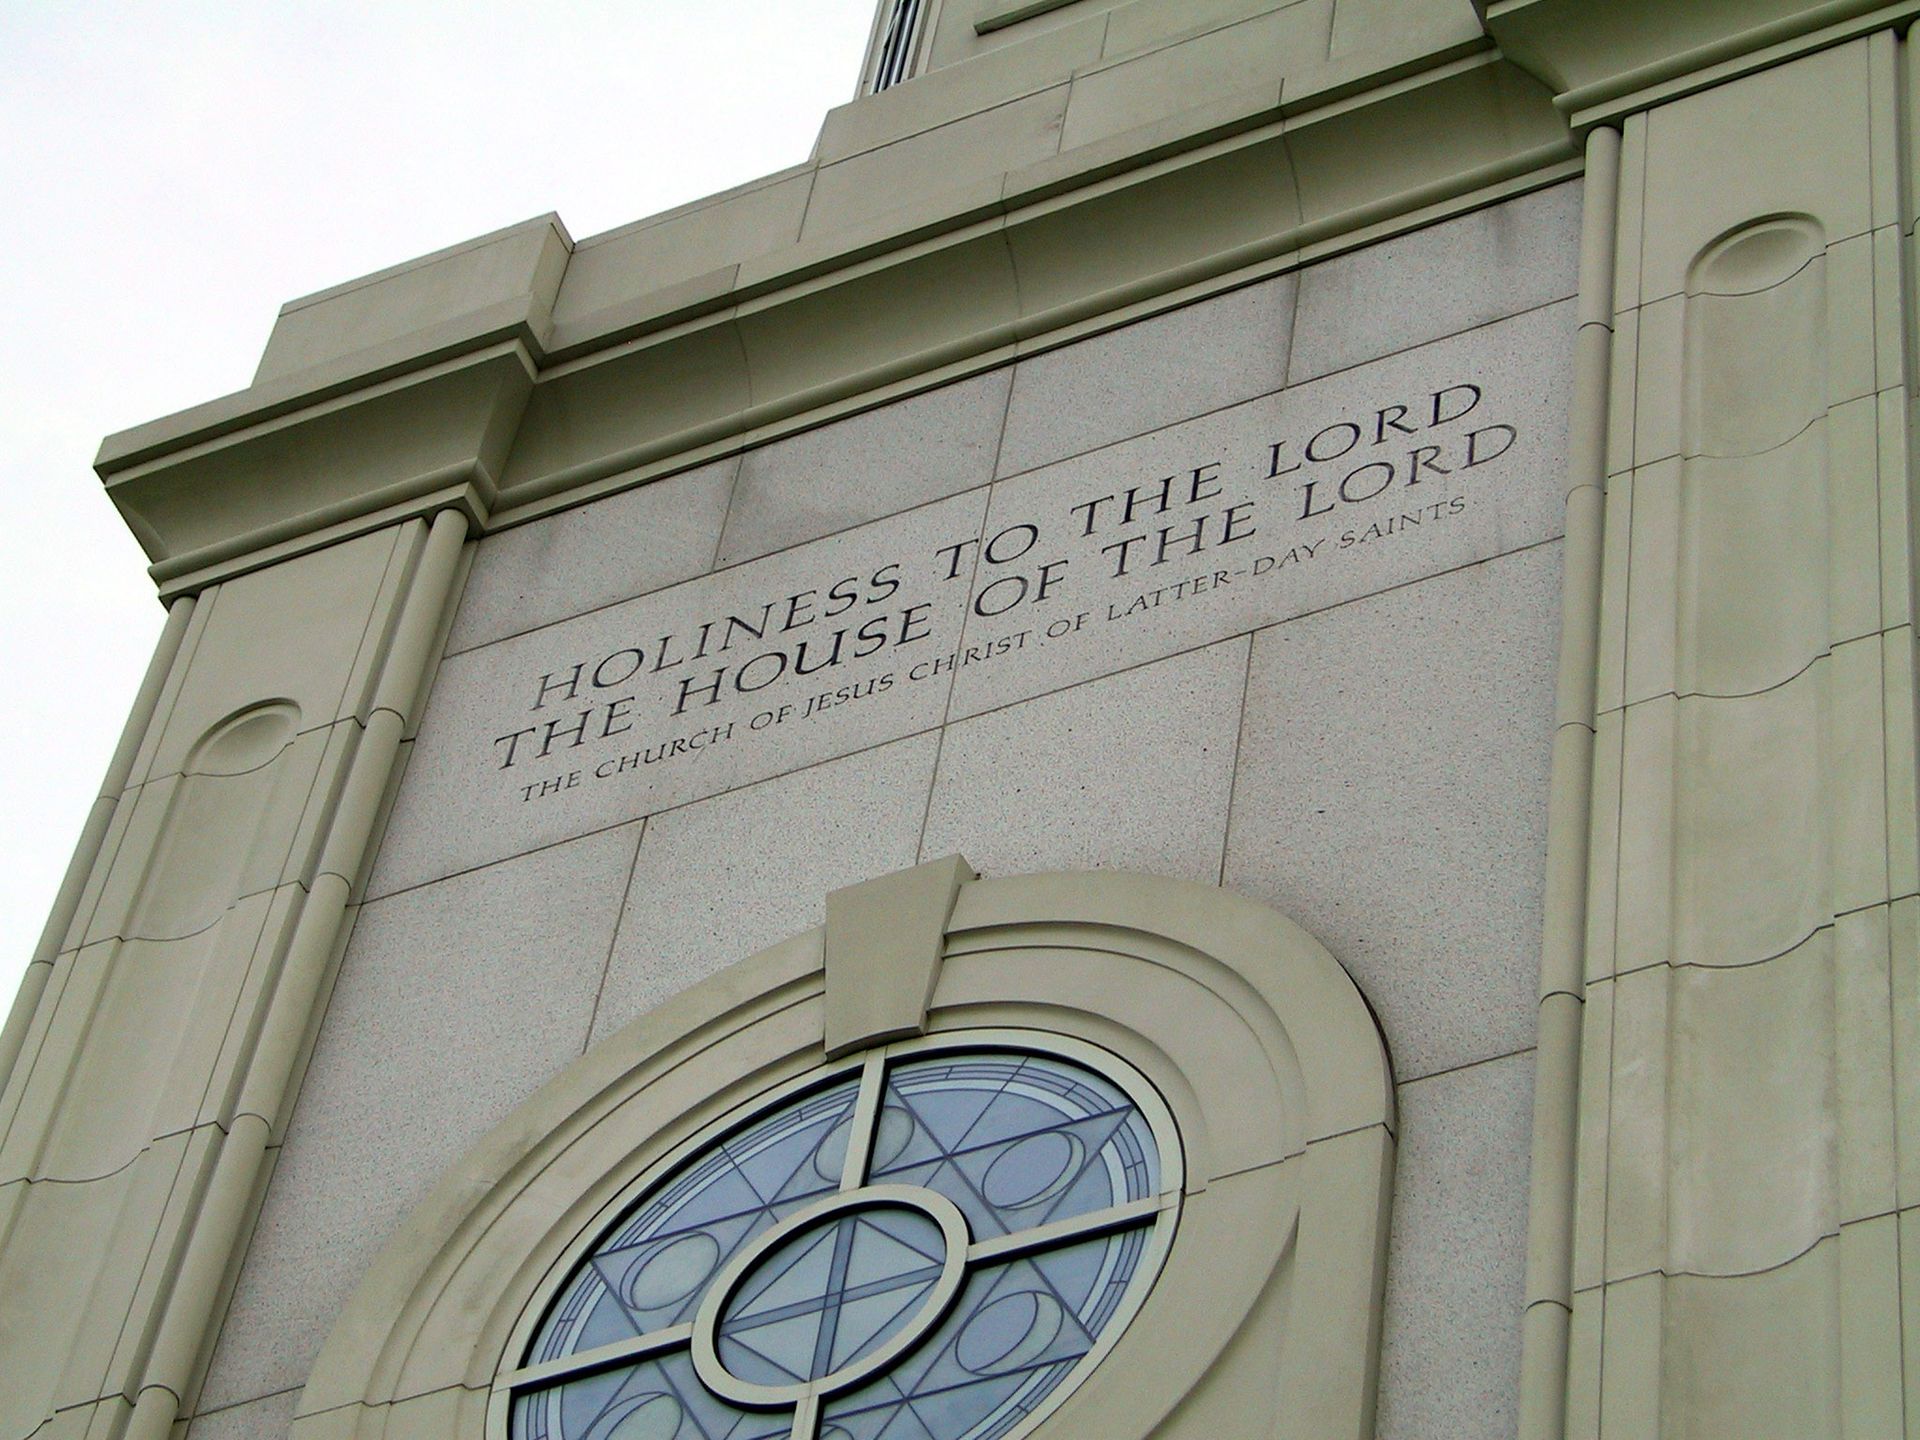 The St. Louis Missouri Temple inscription, “Holiness to the Lord: The House of the Lord,” including the windows and exterior of the temple.